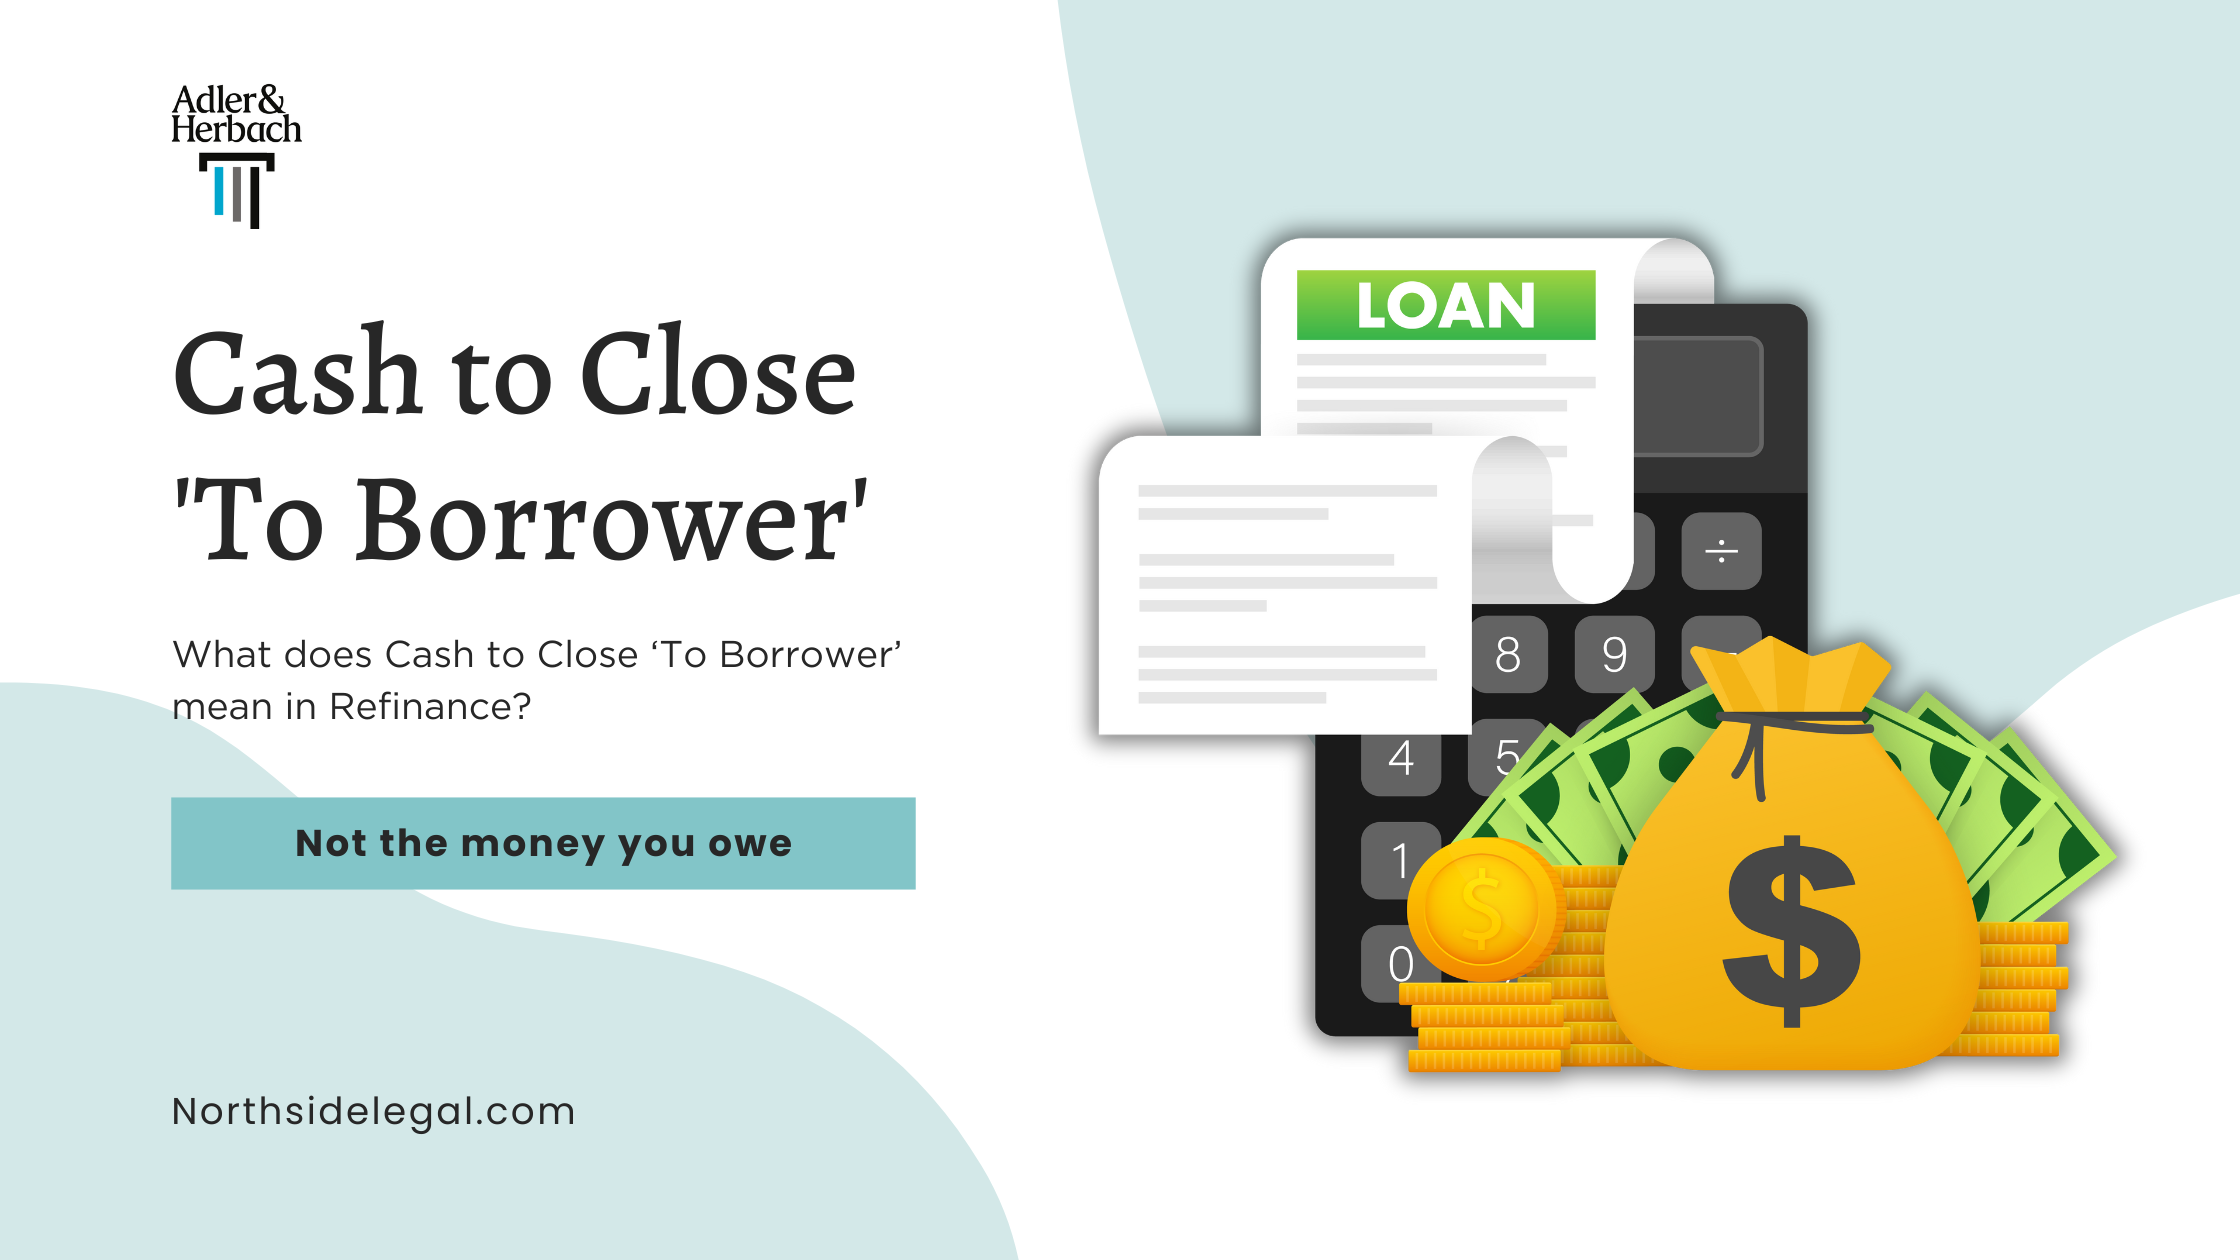 What Does Cash to Close “To Borrower” Mean when Refinancing?